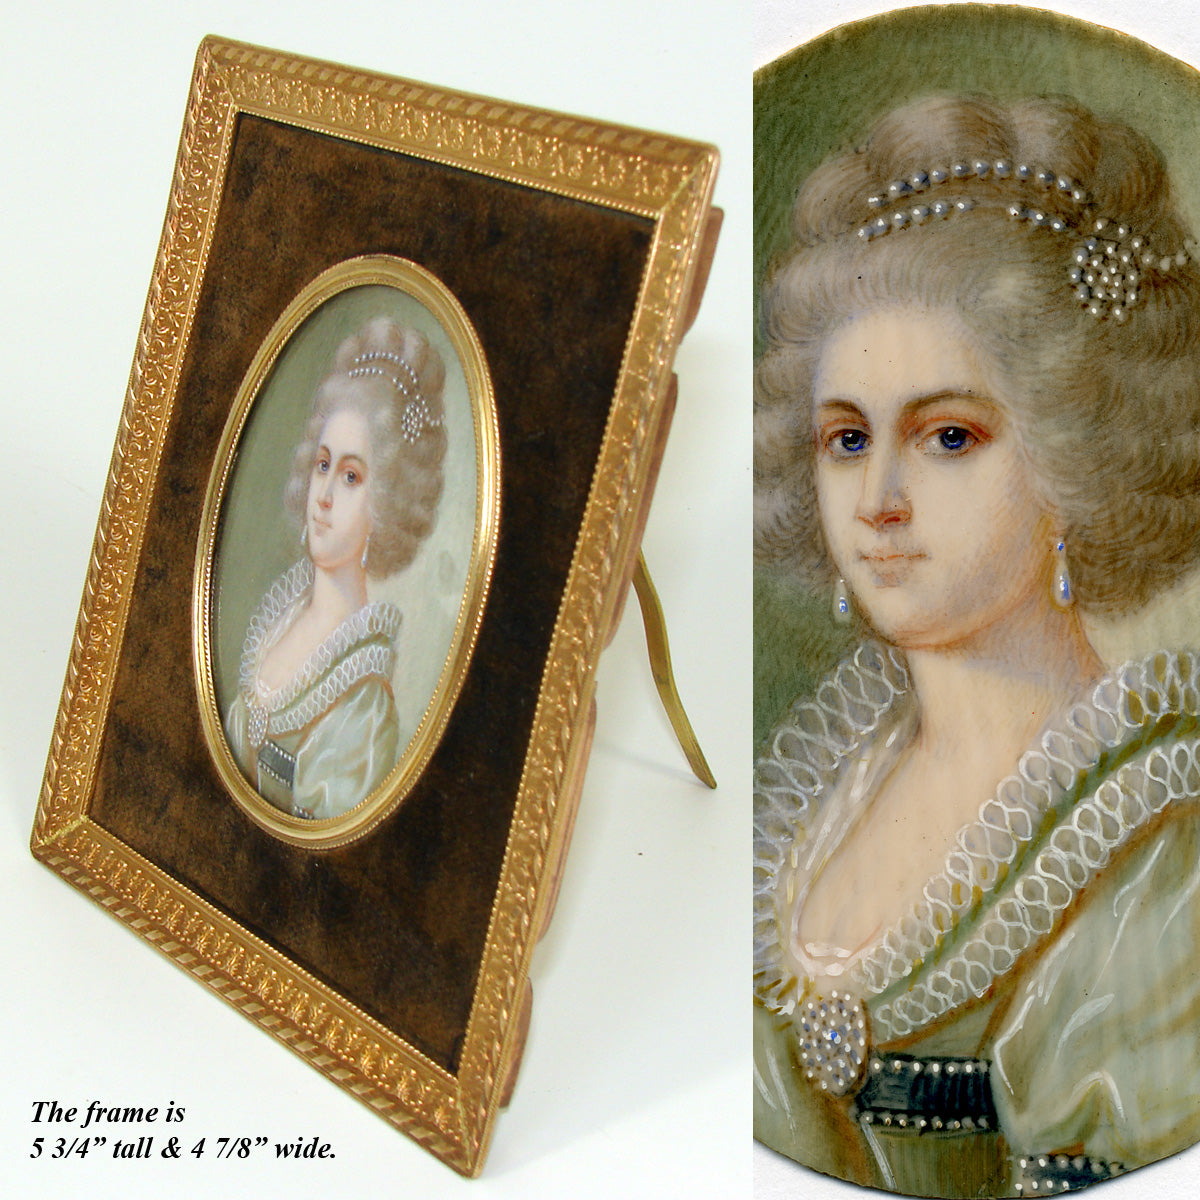 Antique French Portrait Miniature, Woman with Pearl Jewelry, Gilt Bronze Frame